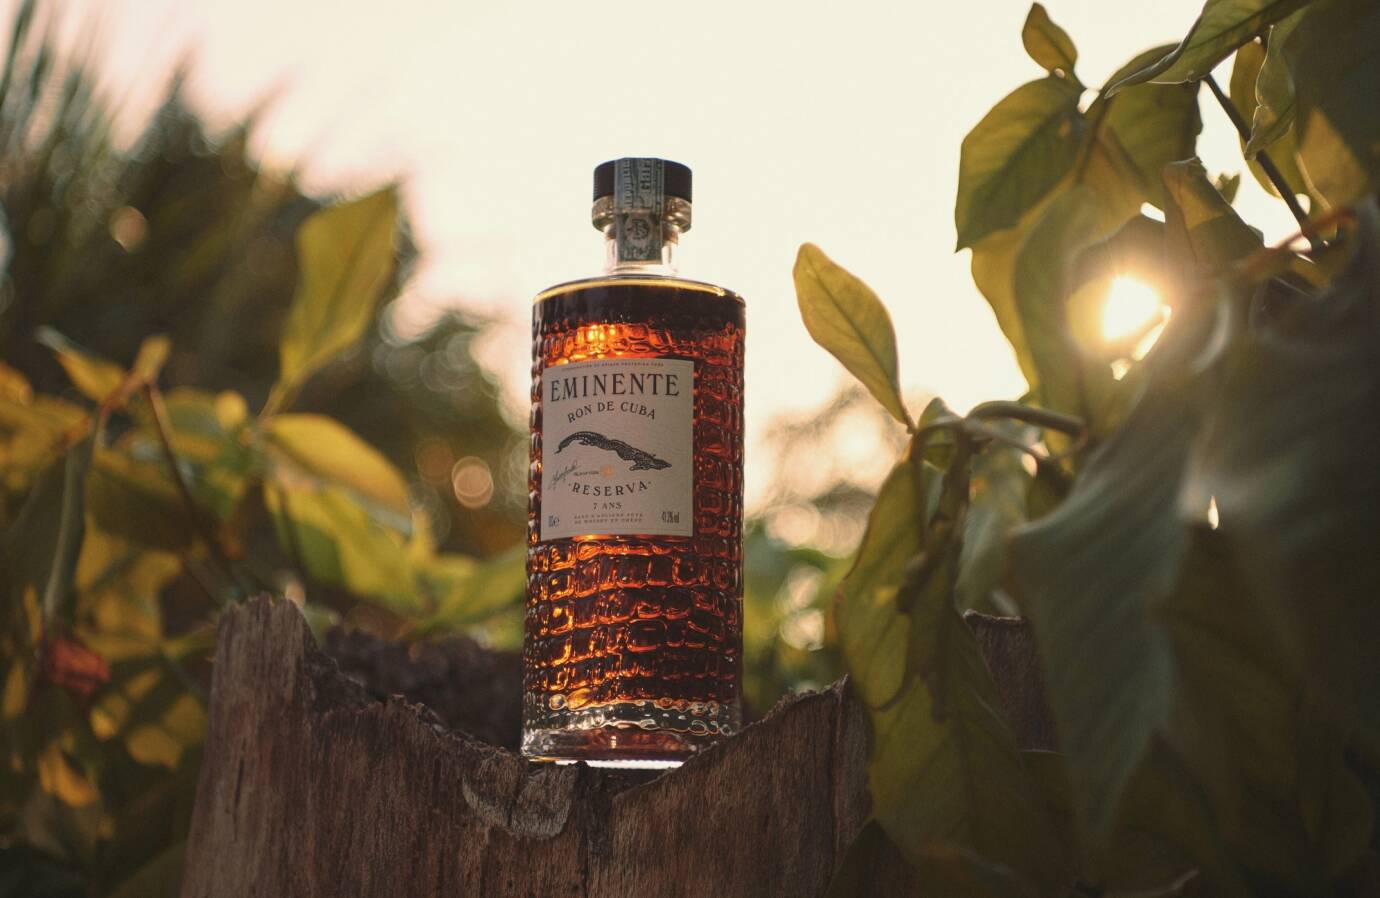 Eminente debuts limited edition gift set - The Spirits Business